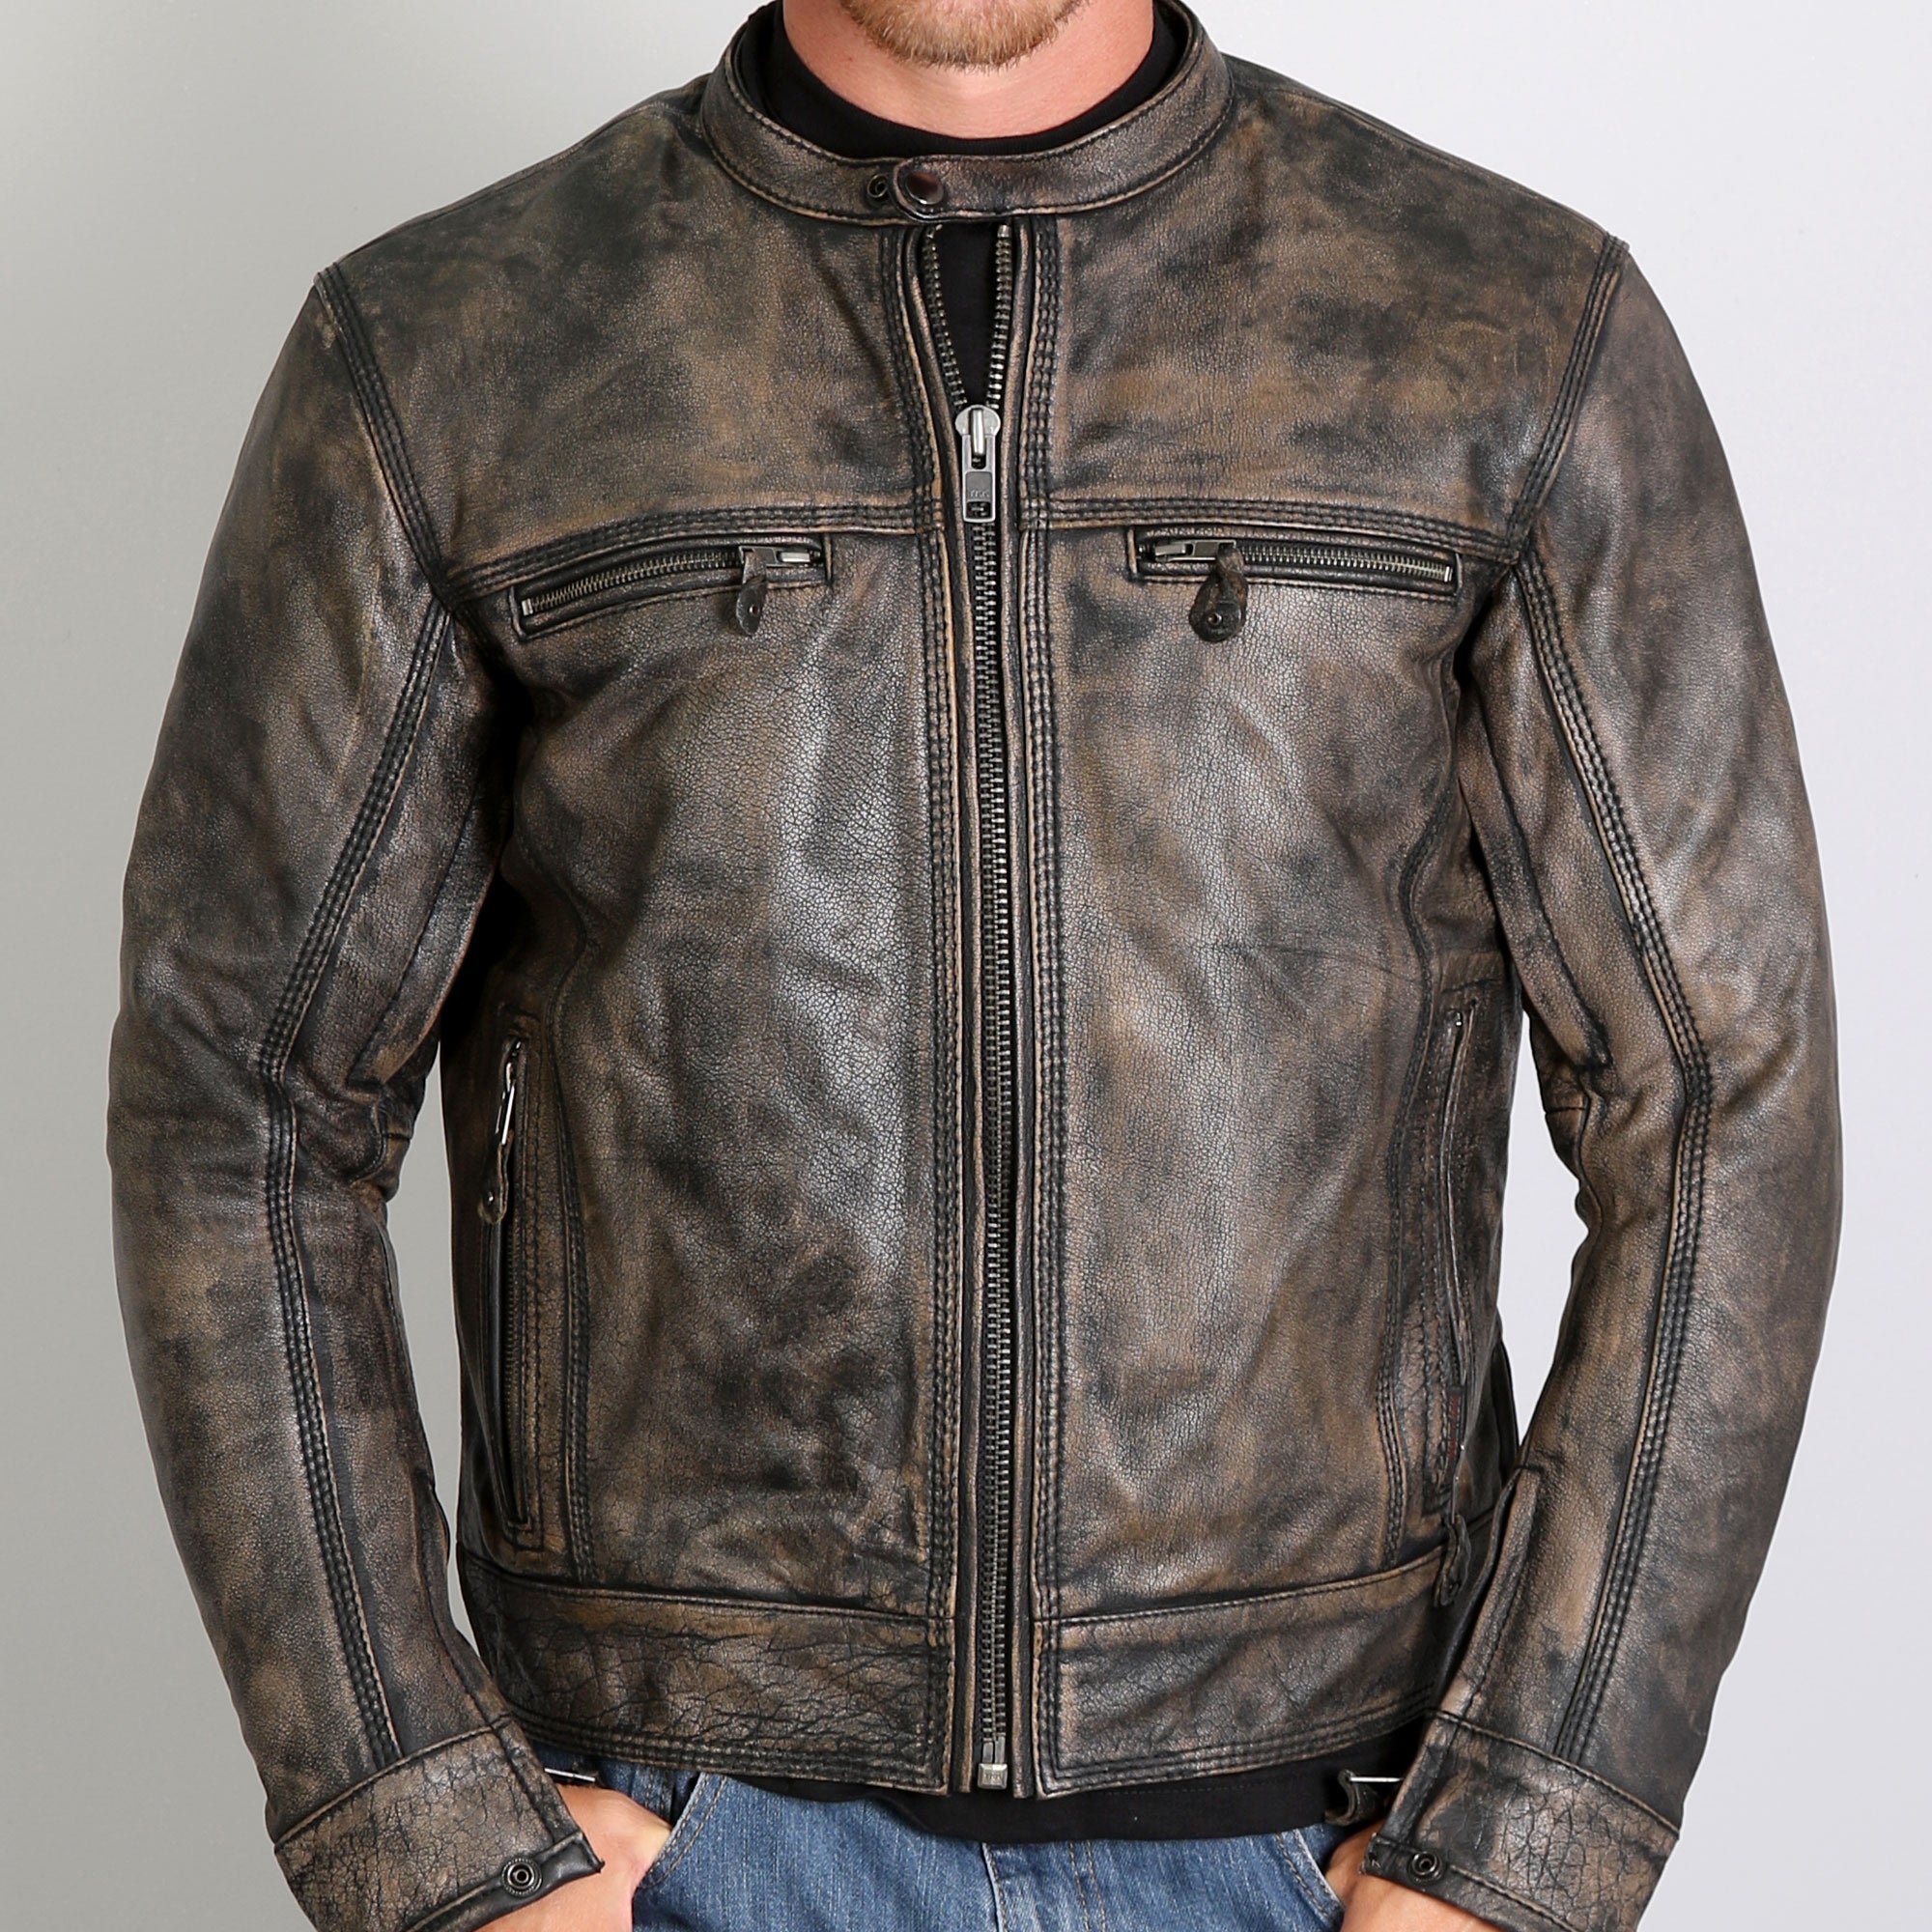 Hot Leathers JKM1019 Men's Distressed Brown Leather Motorcycle Biker Jacket with Gun Pockets